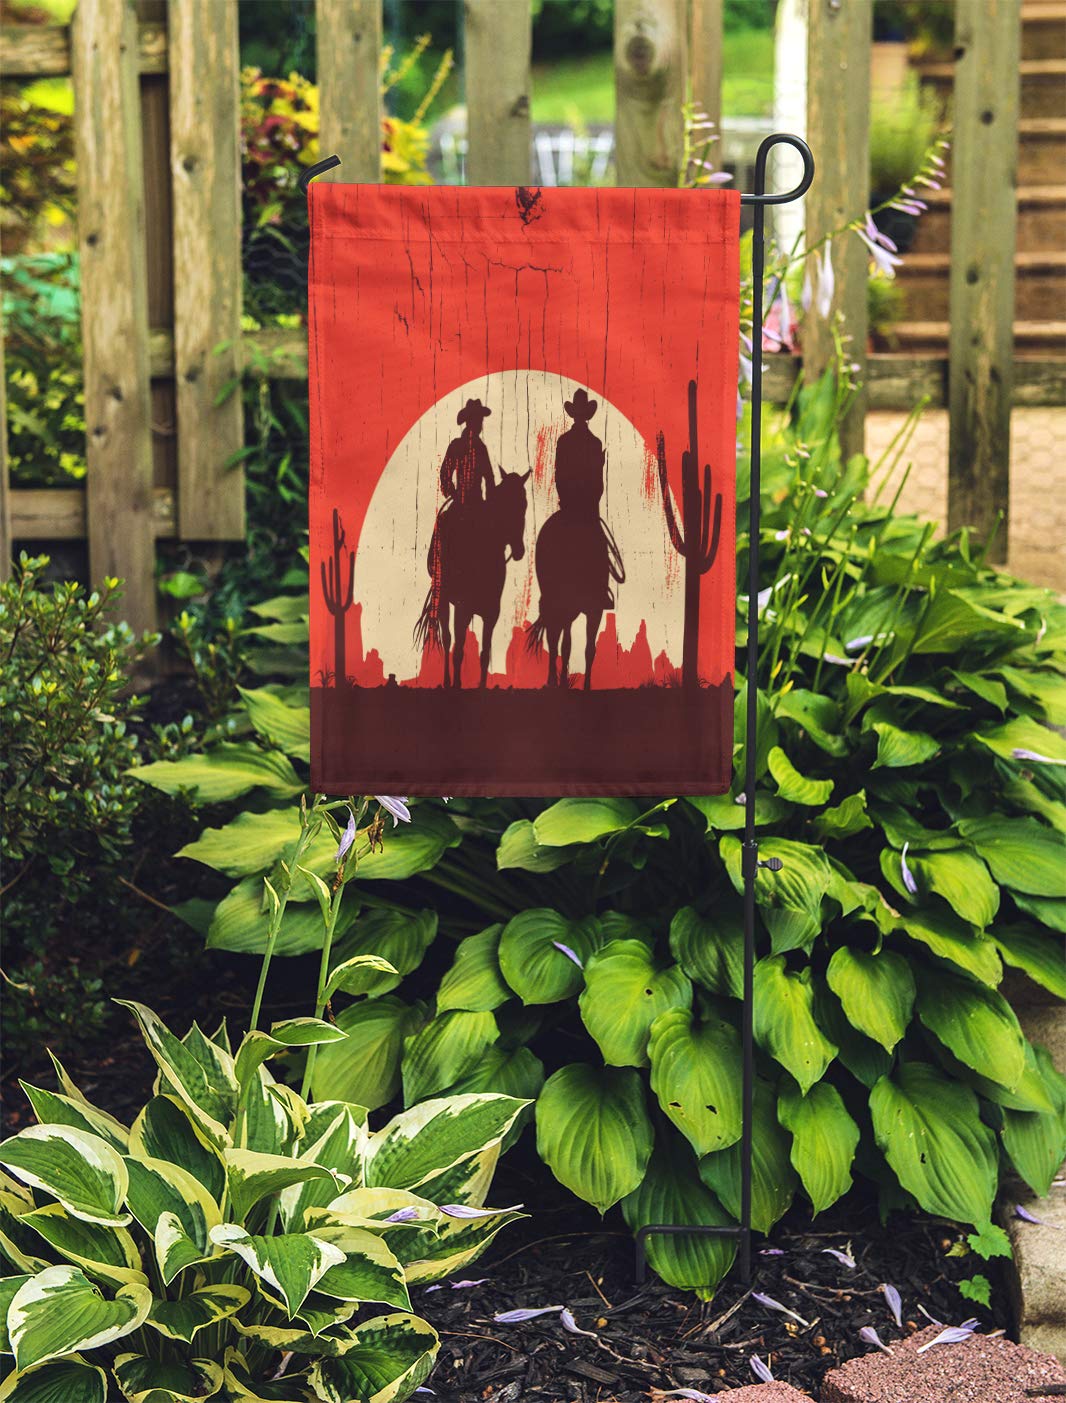 KDAGR Western Silhouette of Cowboy Couple Riding Horses on Wooden Sign Garden Flag Decorative Flag House Banner 28x40 inch - image 2 of 2